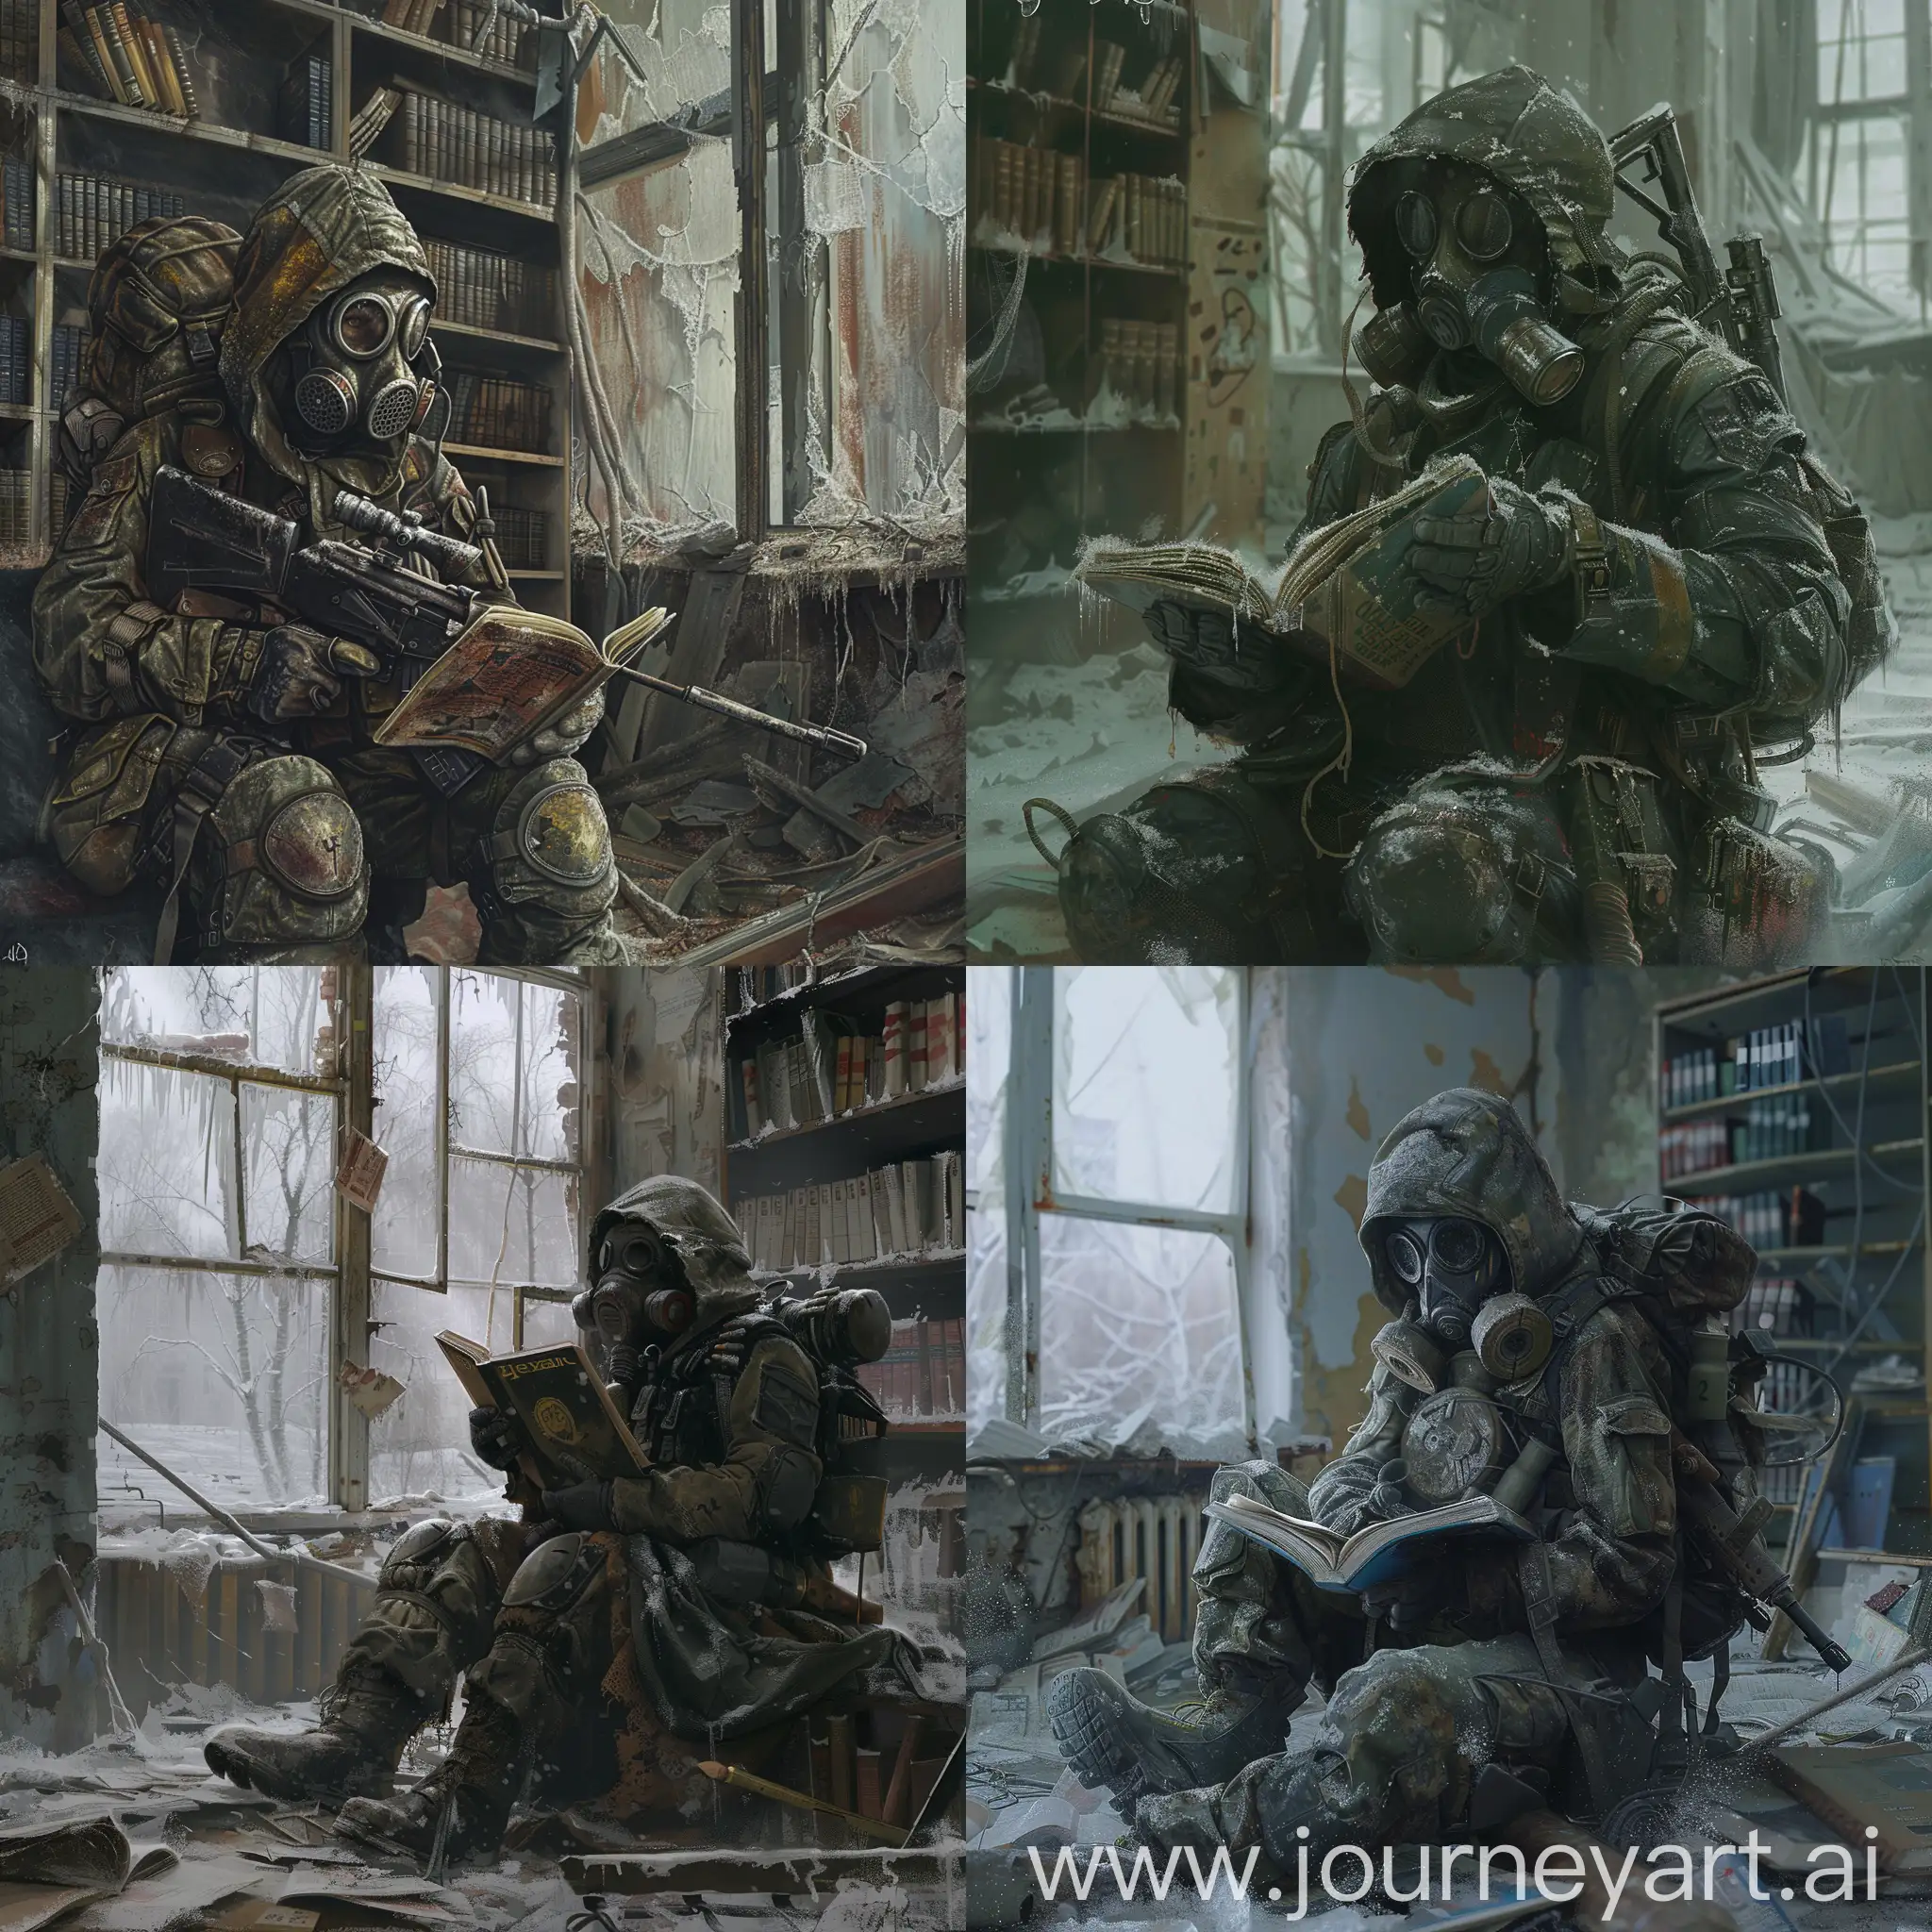 Art radioactive winter, inside the radioactive abandoned library named after Lenin where everything is destroyed and dirty, a stalker in a gasmask, with sniper rifle in the arms, in a darned winter jumpsuit, on top of a jumpsuit a homemade metal protection, a bib and more, the stalker looks at the book in his hand.